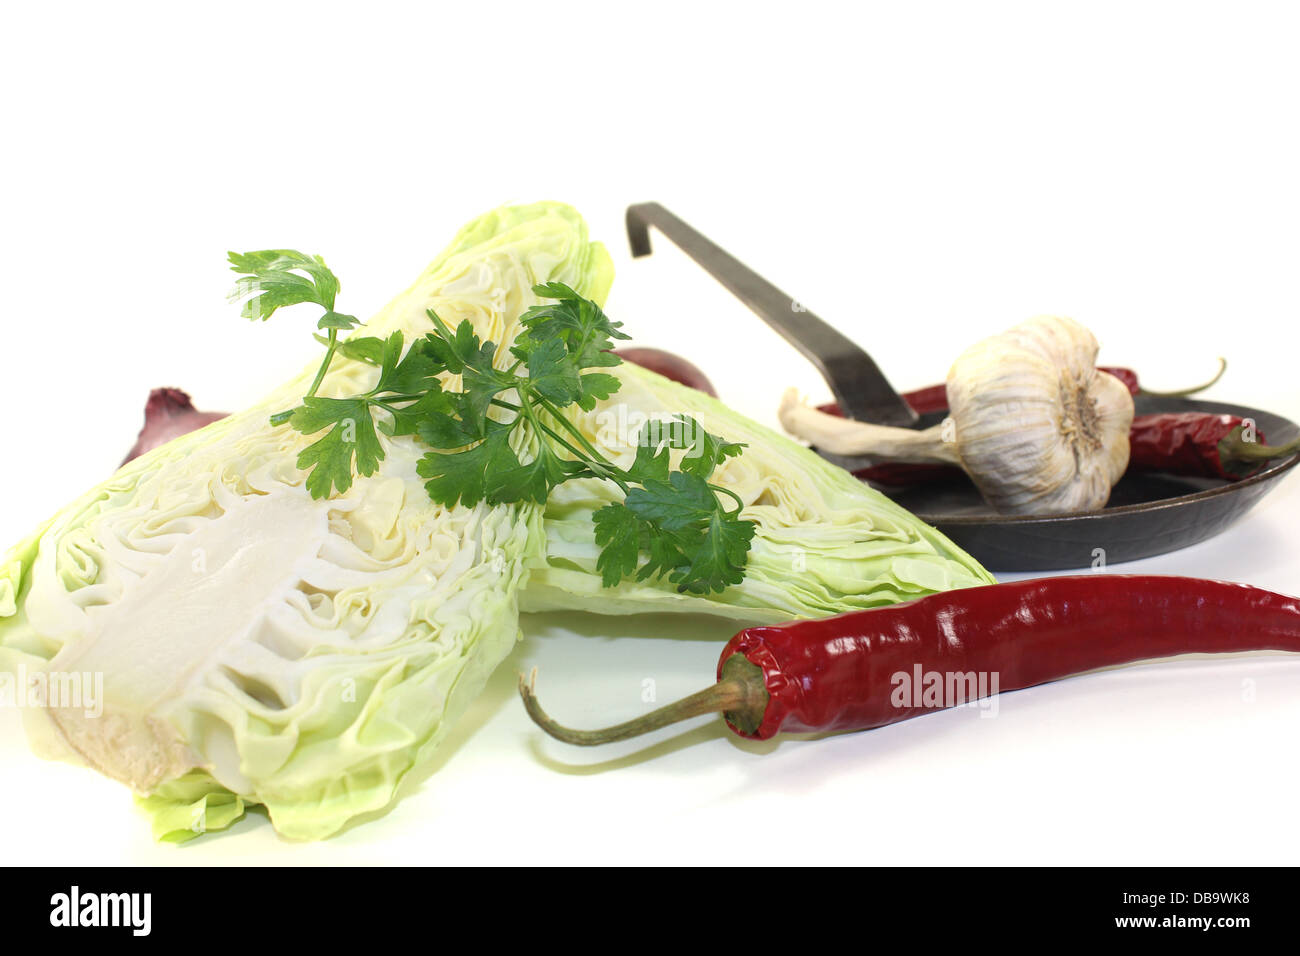 sweetheart cabbage with parsley, peppers and onions on a light background Stock Photo